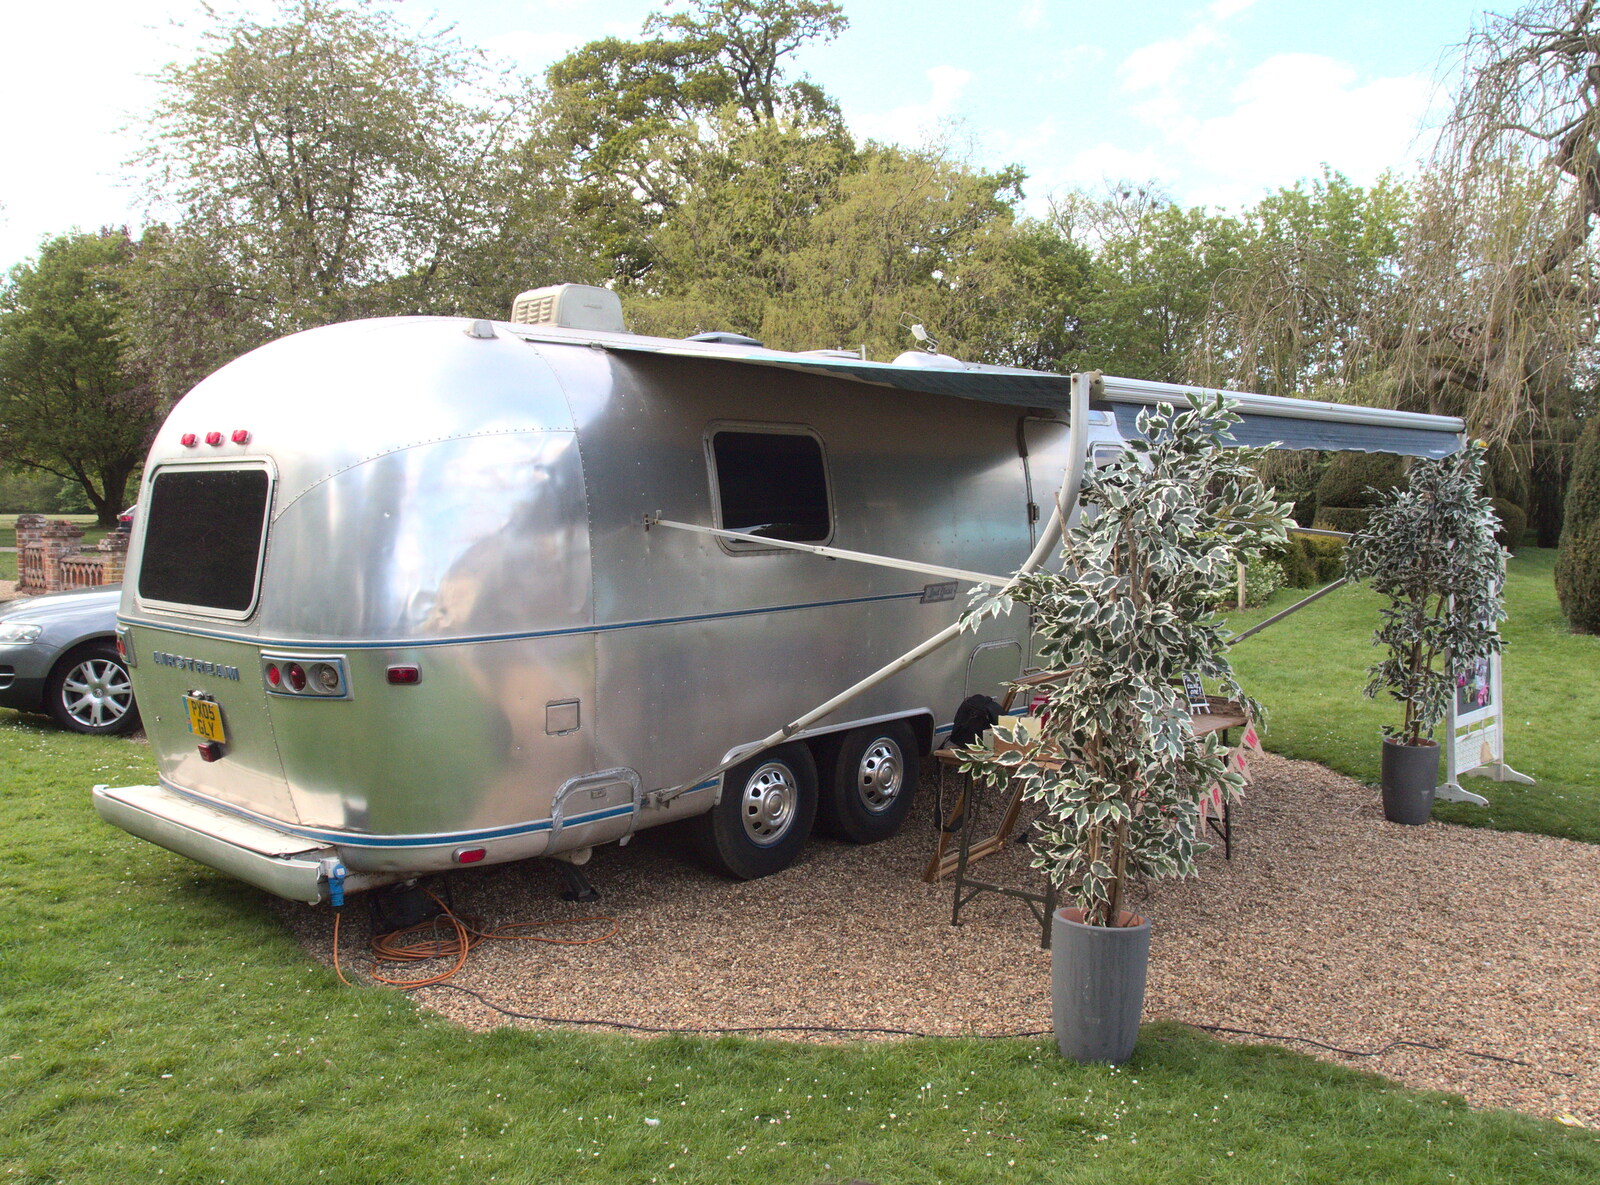 An Airstream caravan is a mobile studio from The BBs at New Buckeham, and Beers at Katzenjammer's, London - 16th May 2016